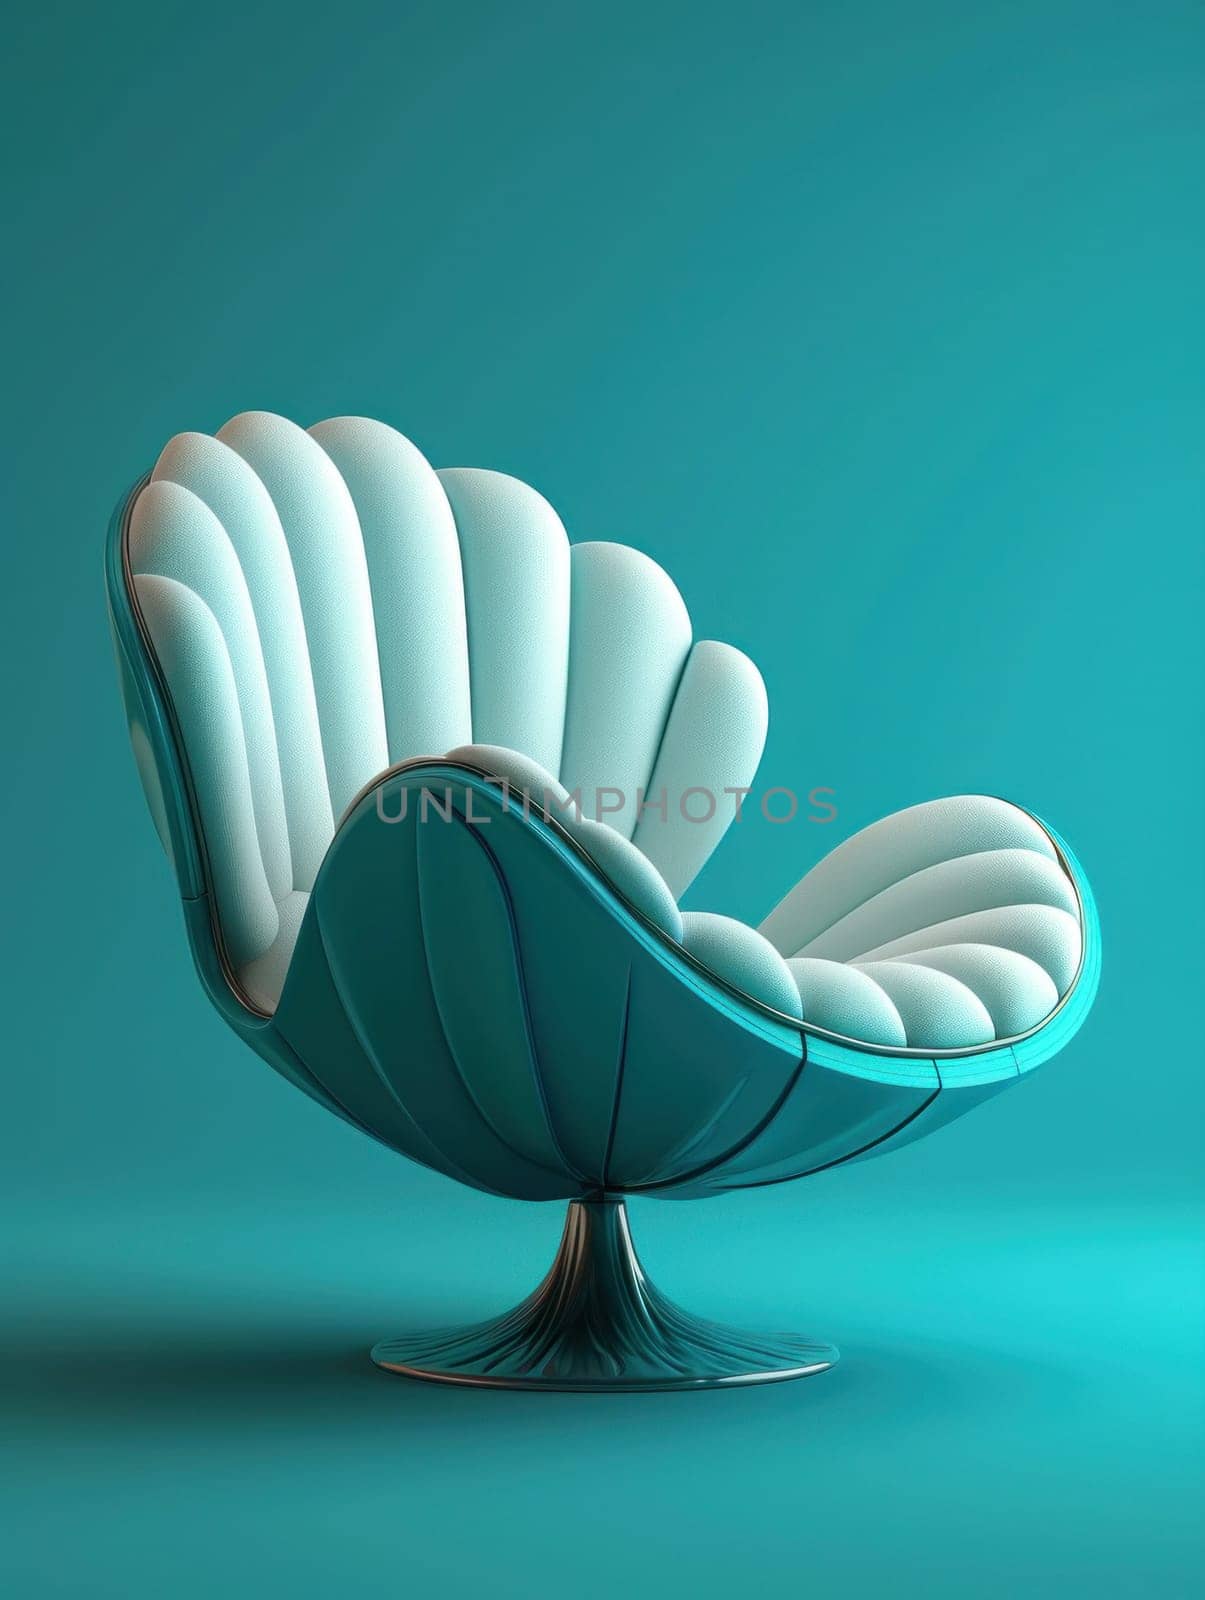 A modern chair with a shell design on the back